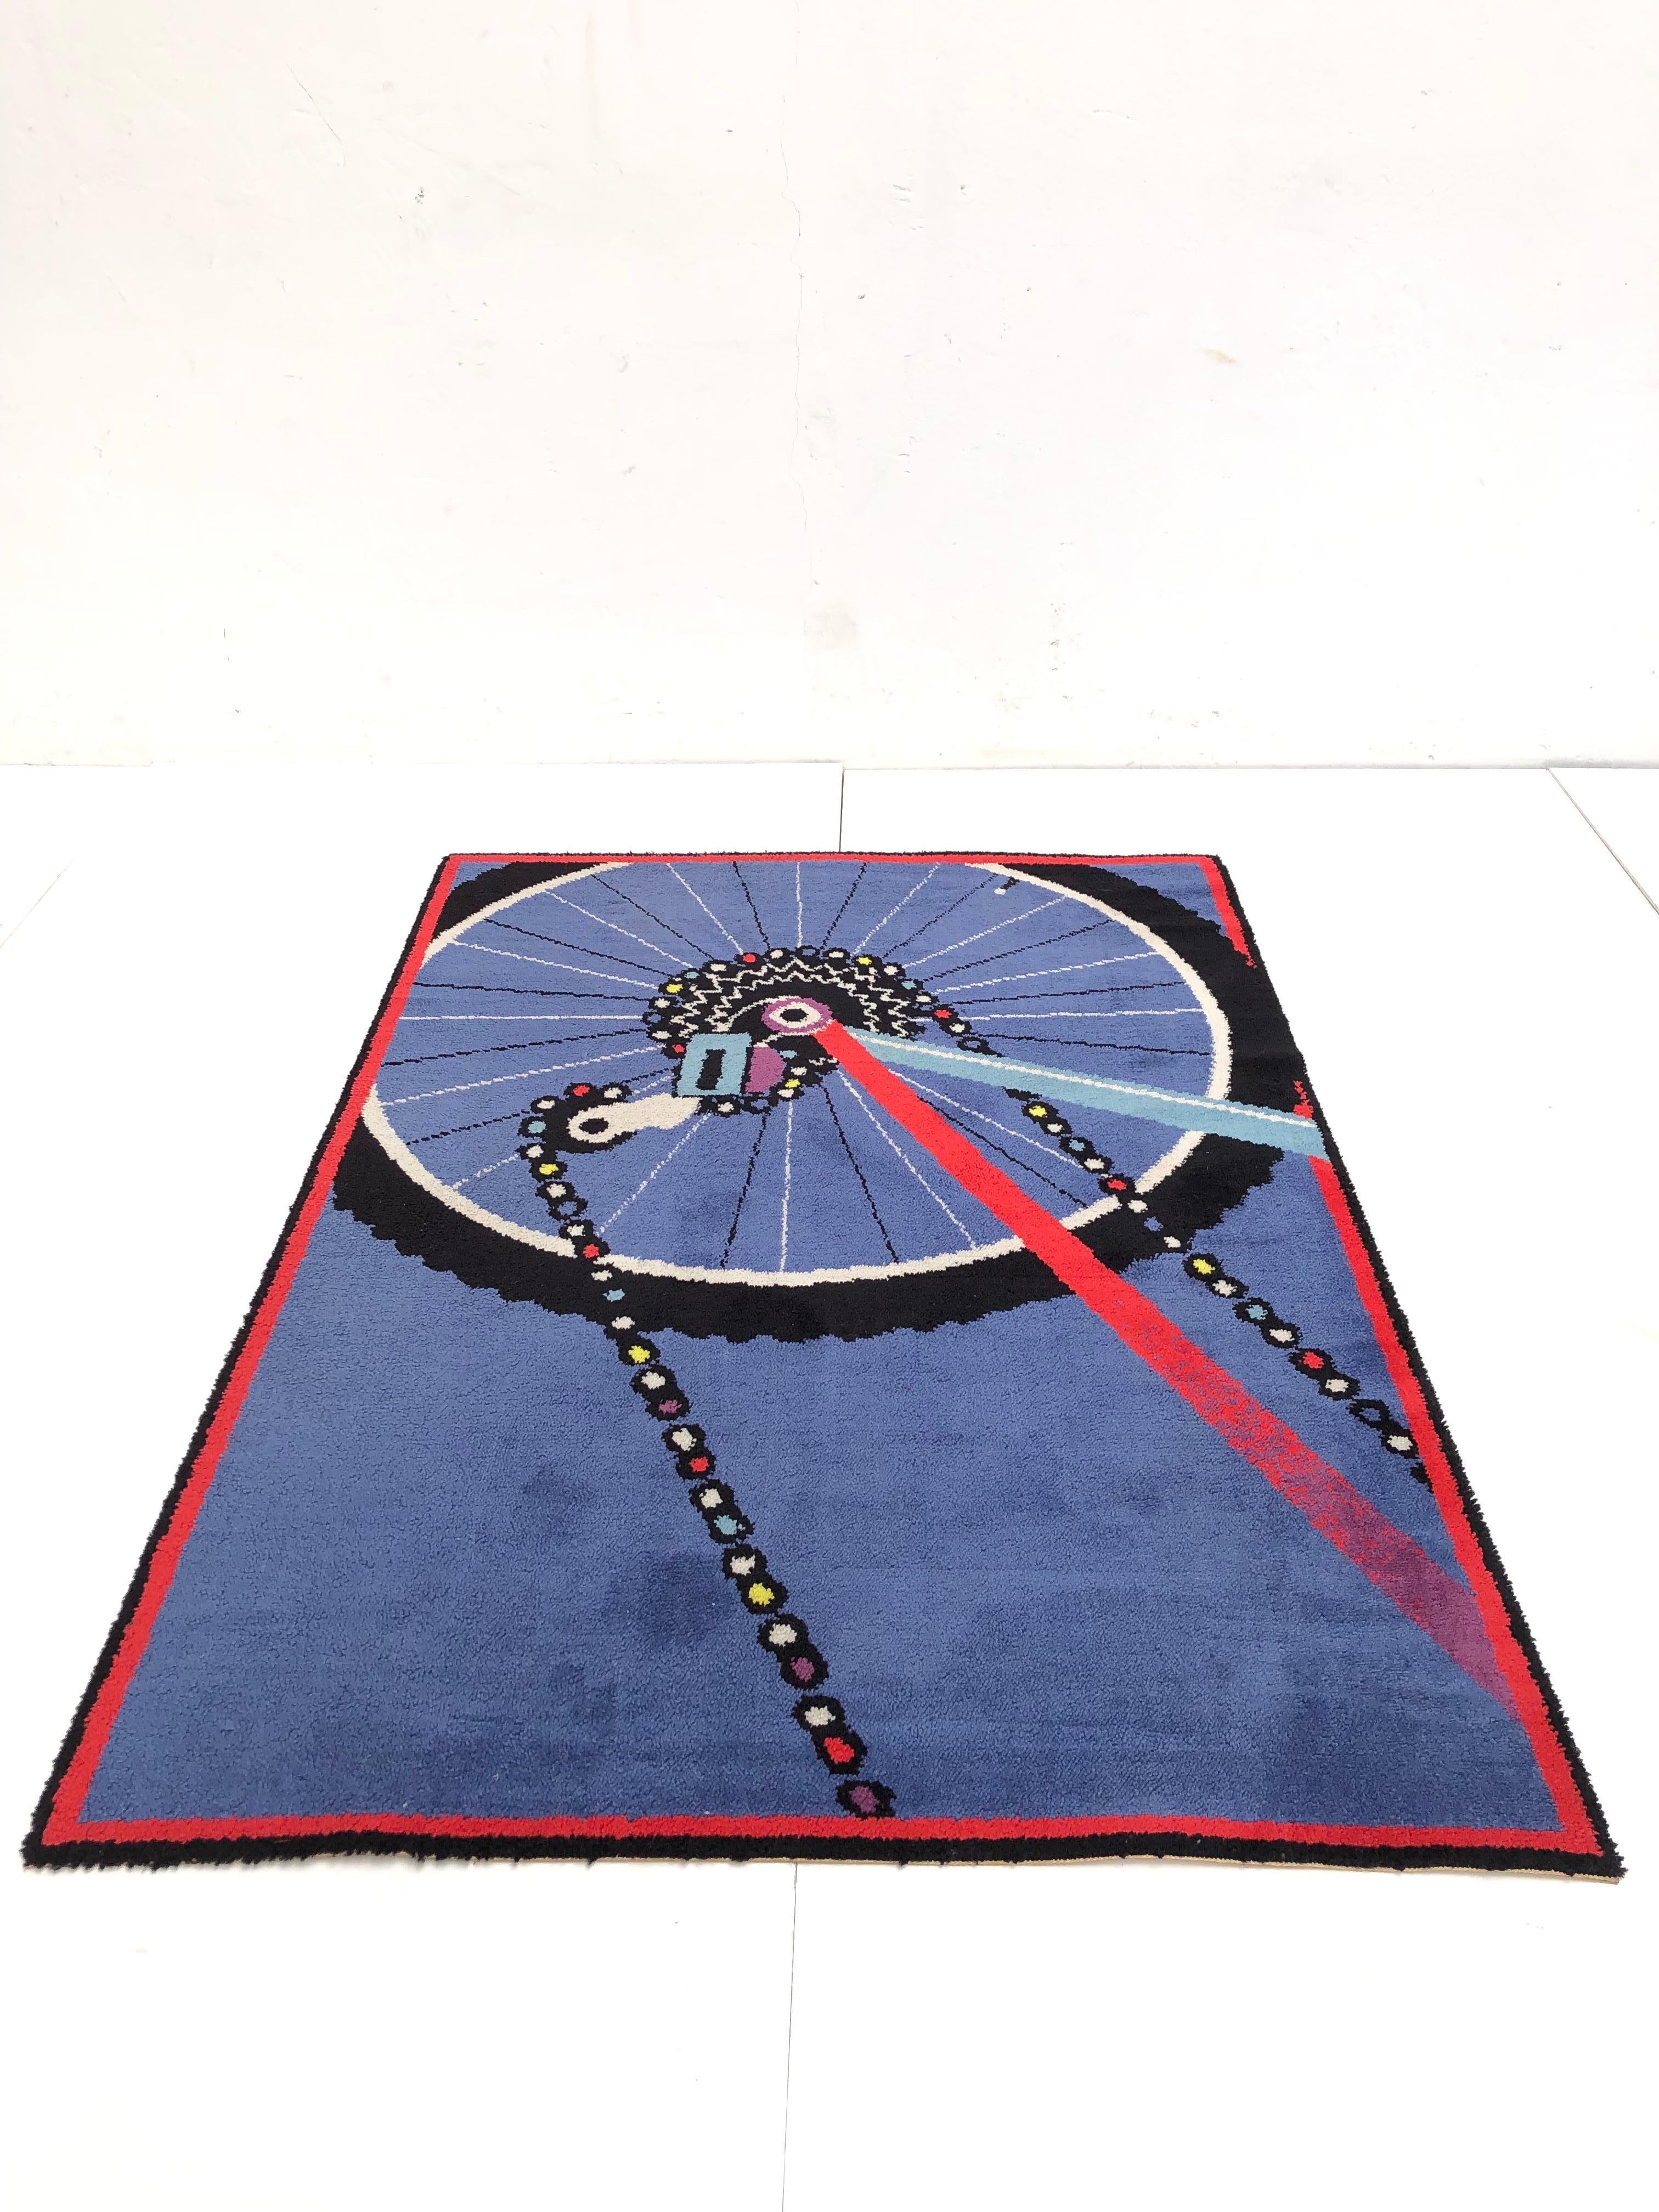 Acrylic ATB Imagine Studio Design Carpet by Desso The Netherlands, Late 1970s For Sale